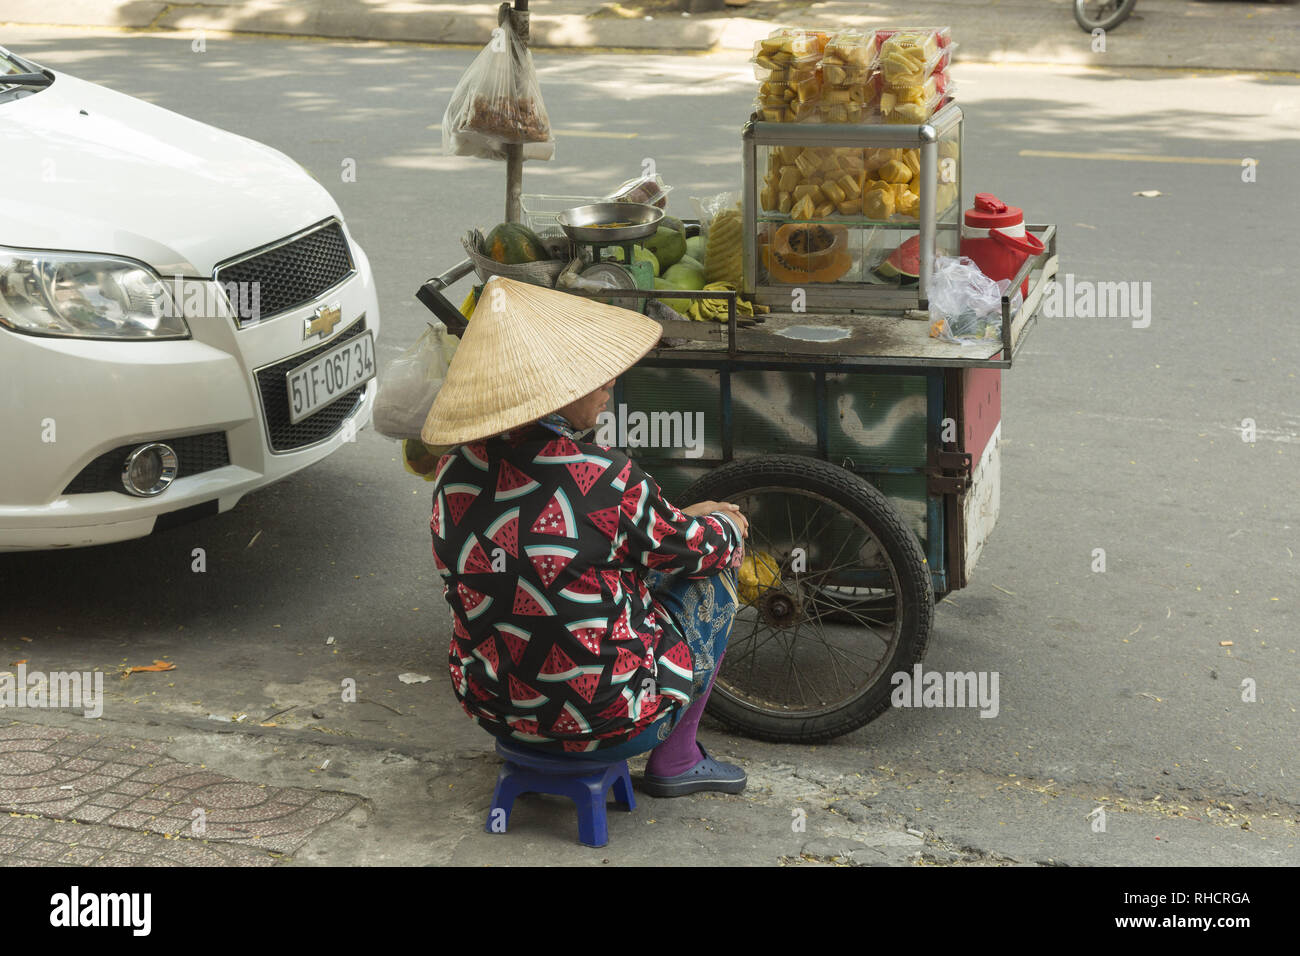 Woman selling fruits on the street in Vietnam Stock Photo